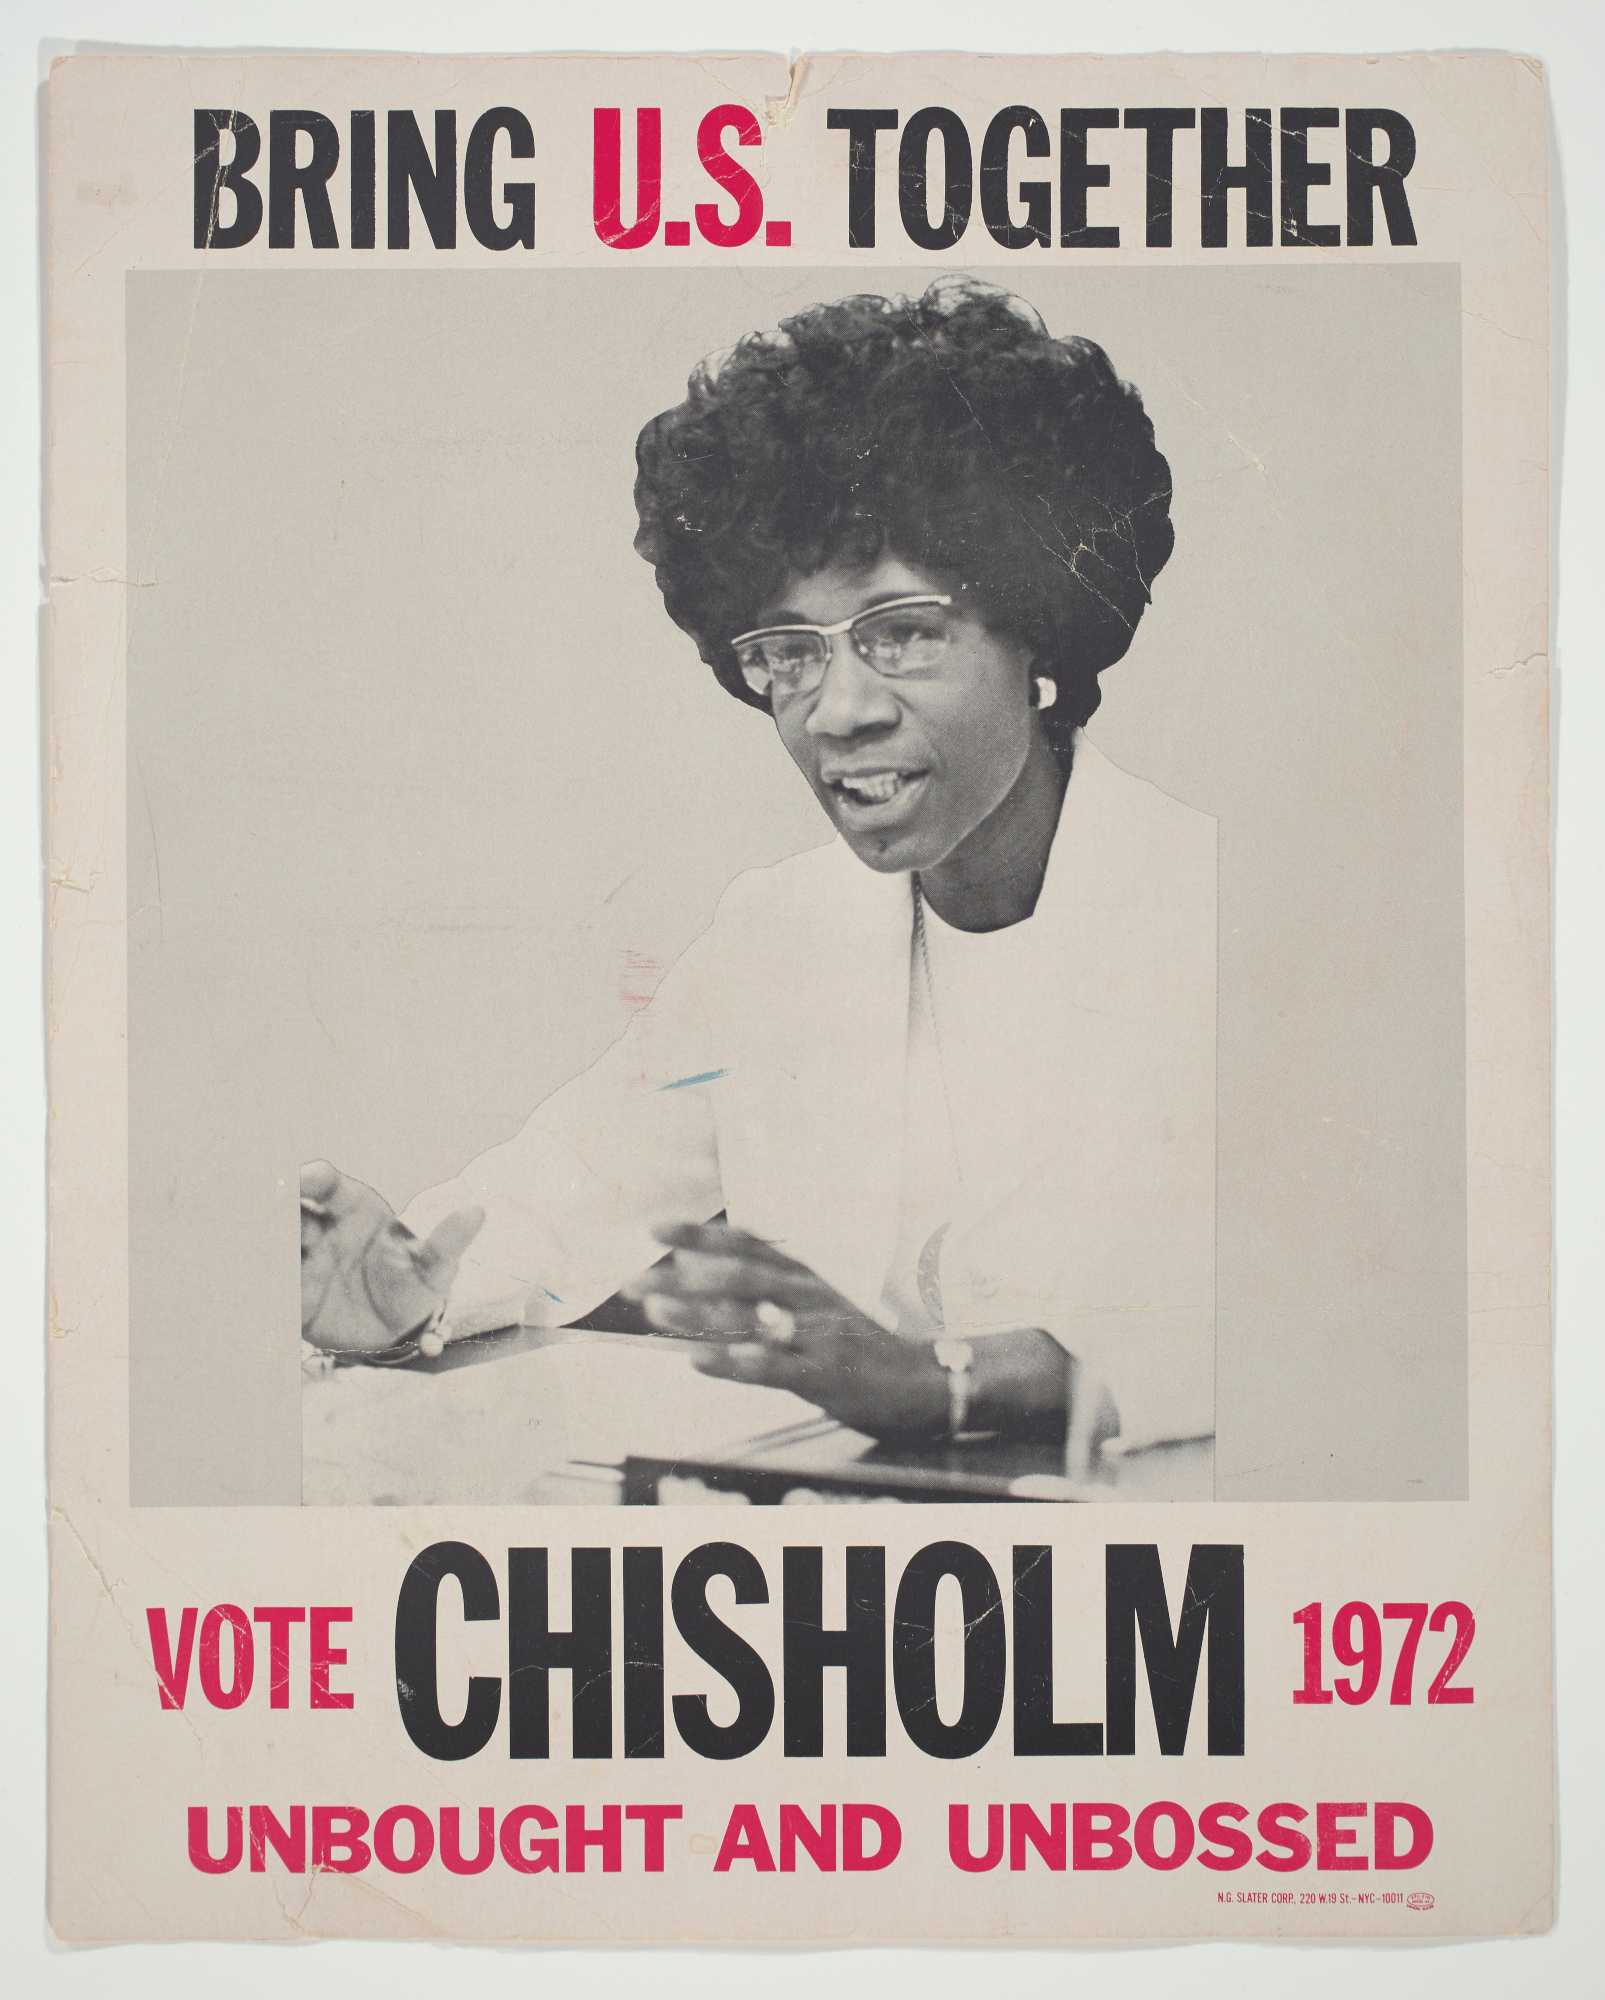 A political poster for United States presidential candidate Shirley Chisholm. Off-white with black and red type. At top, it reads "BRING U.S. TOGETHER" in black with the "U.S." in red. Underneath there is a black-and-white image of Shirley Chisholm sitting at a table with papers in front of her, speaking and gesturing with her hands, wearing all white. This image is bordered on the left and right by a light gray color block. At the bottom, reads "VOTE CHISHOLM 1972/ UNBOUGHT AND UNBOSSED" with "CHISHOLM" in black and everythign else in red, in various font sizes. In the bottom right corner, in small red type, reads "N.G. SLATER CORP., 220 W. 19 ST. - NYC - 10011."  On reverse, handwritten in purple marker, reads "Chisholm For President/ 61 Henry St./ Saratoga N.Y./ 584-7015/ Rev. Kennedy/ Mrs. Molineaux" at the top, aligned towards the left.